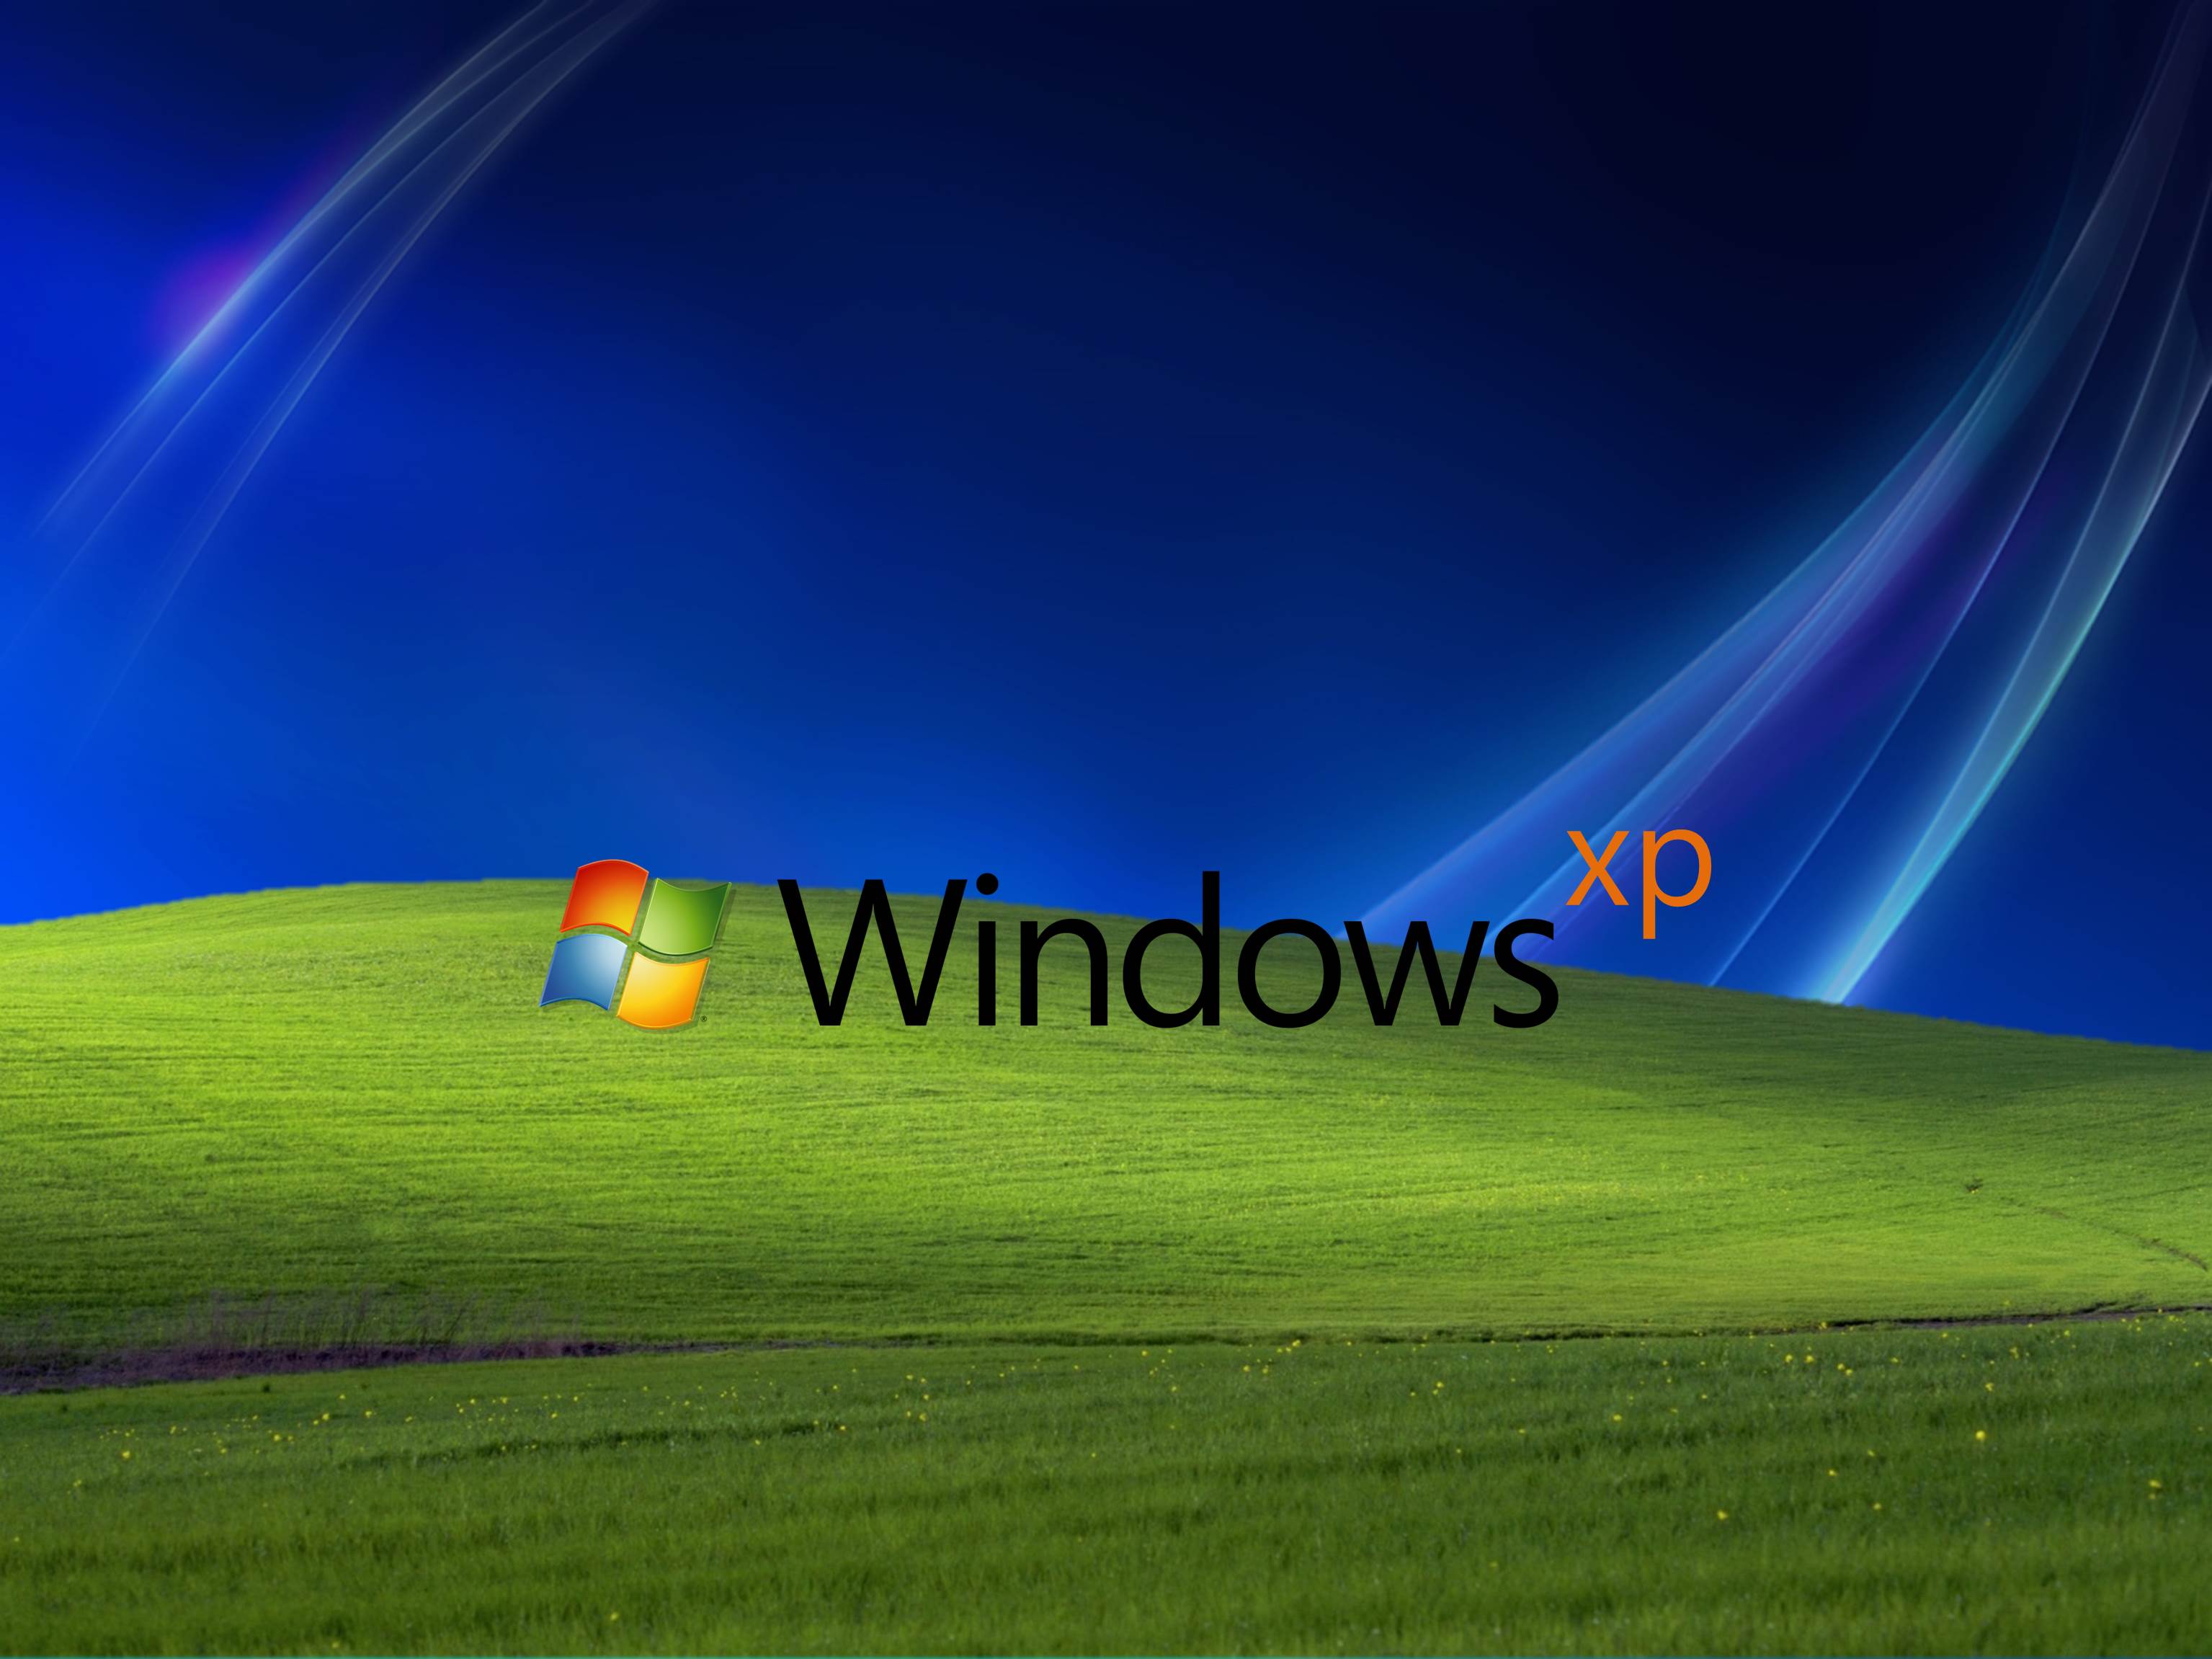 Hd Wallpapers For Windows Xp Group 91